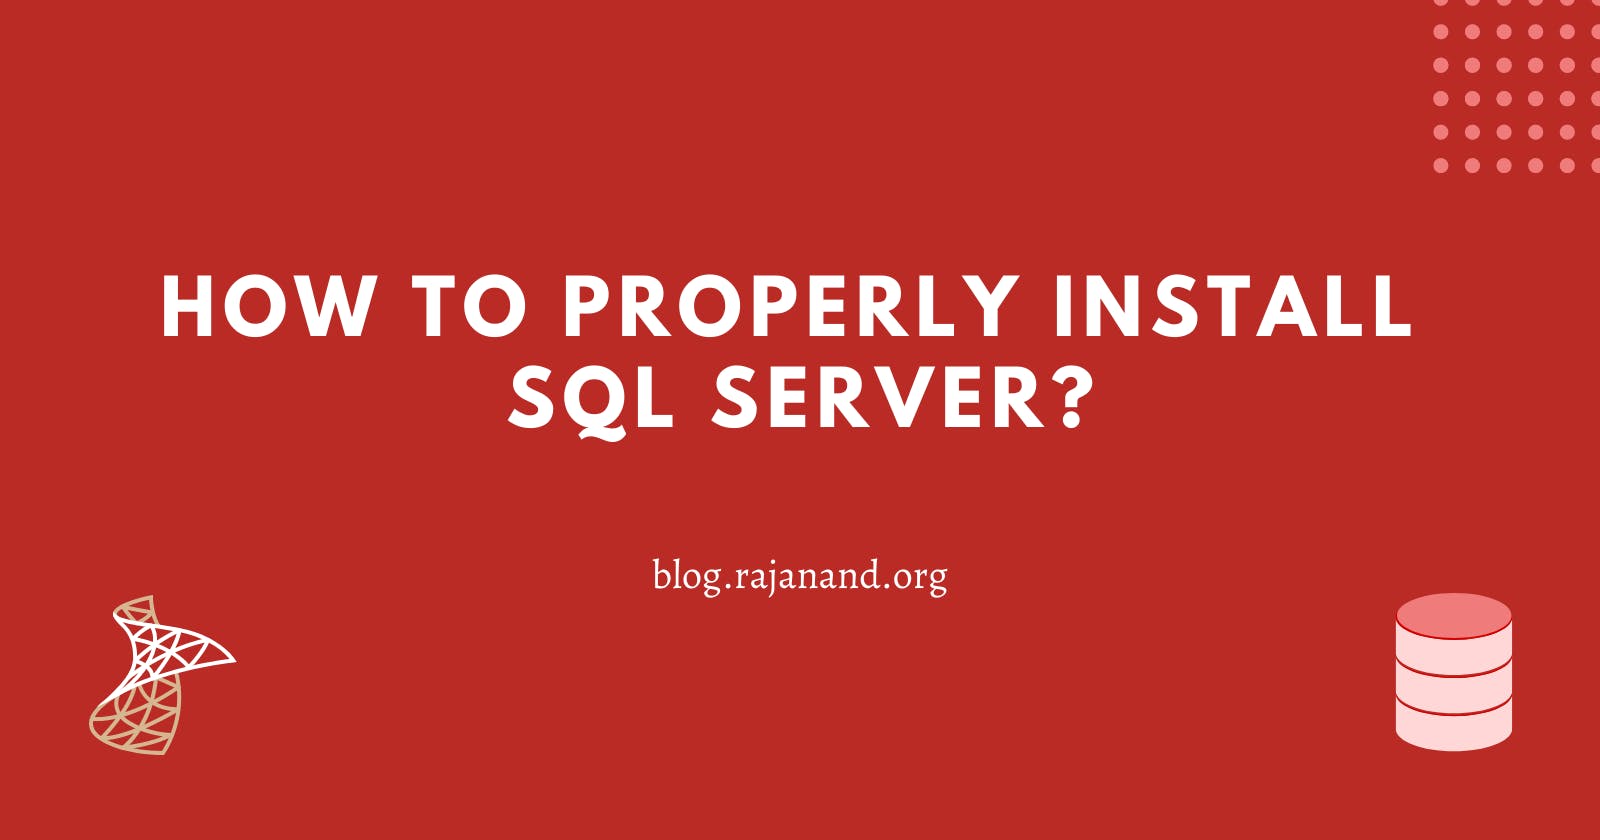 How to properly install SQL Server?